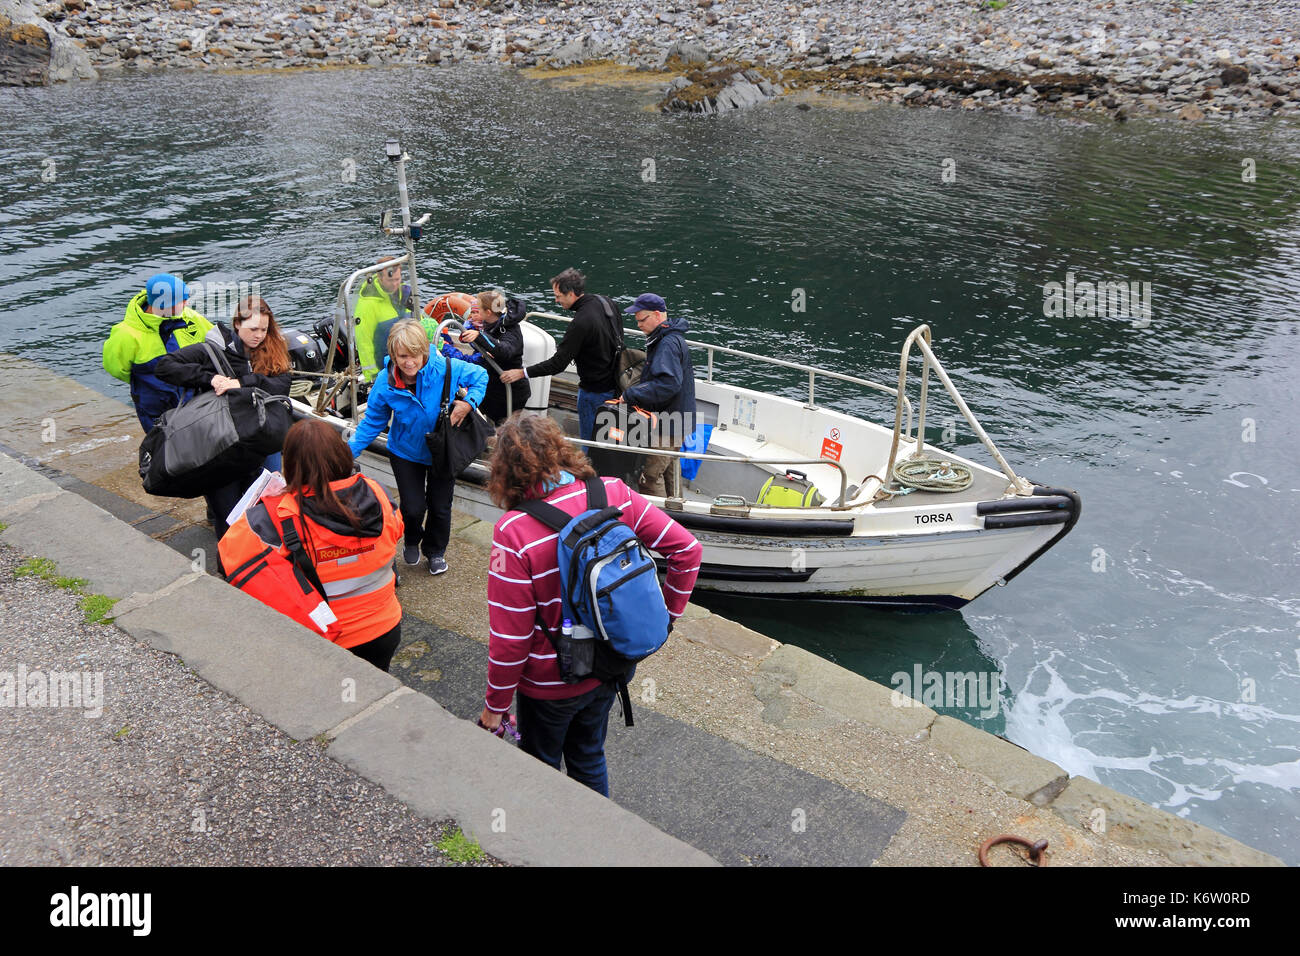 Small ferry boat, Torsa, taking passengers from Isle of Seil to Island of Easdale, Ellenabeich, Argyll, Scotland Stock Photo